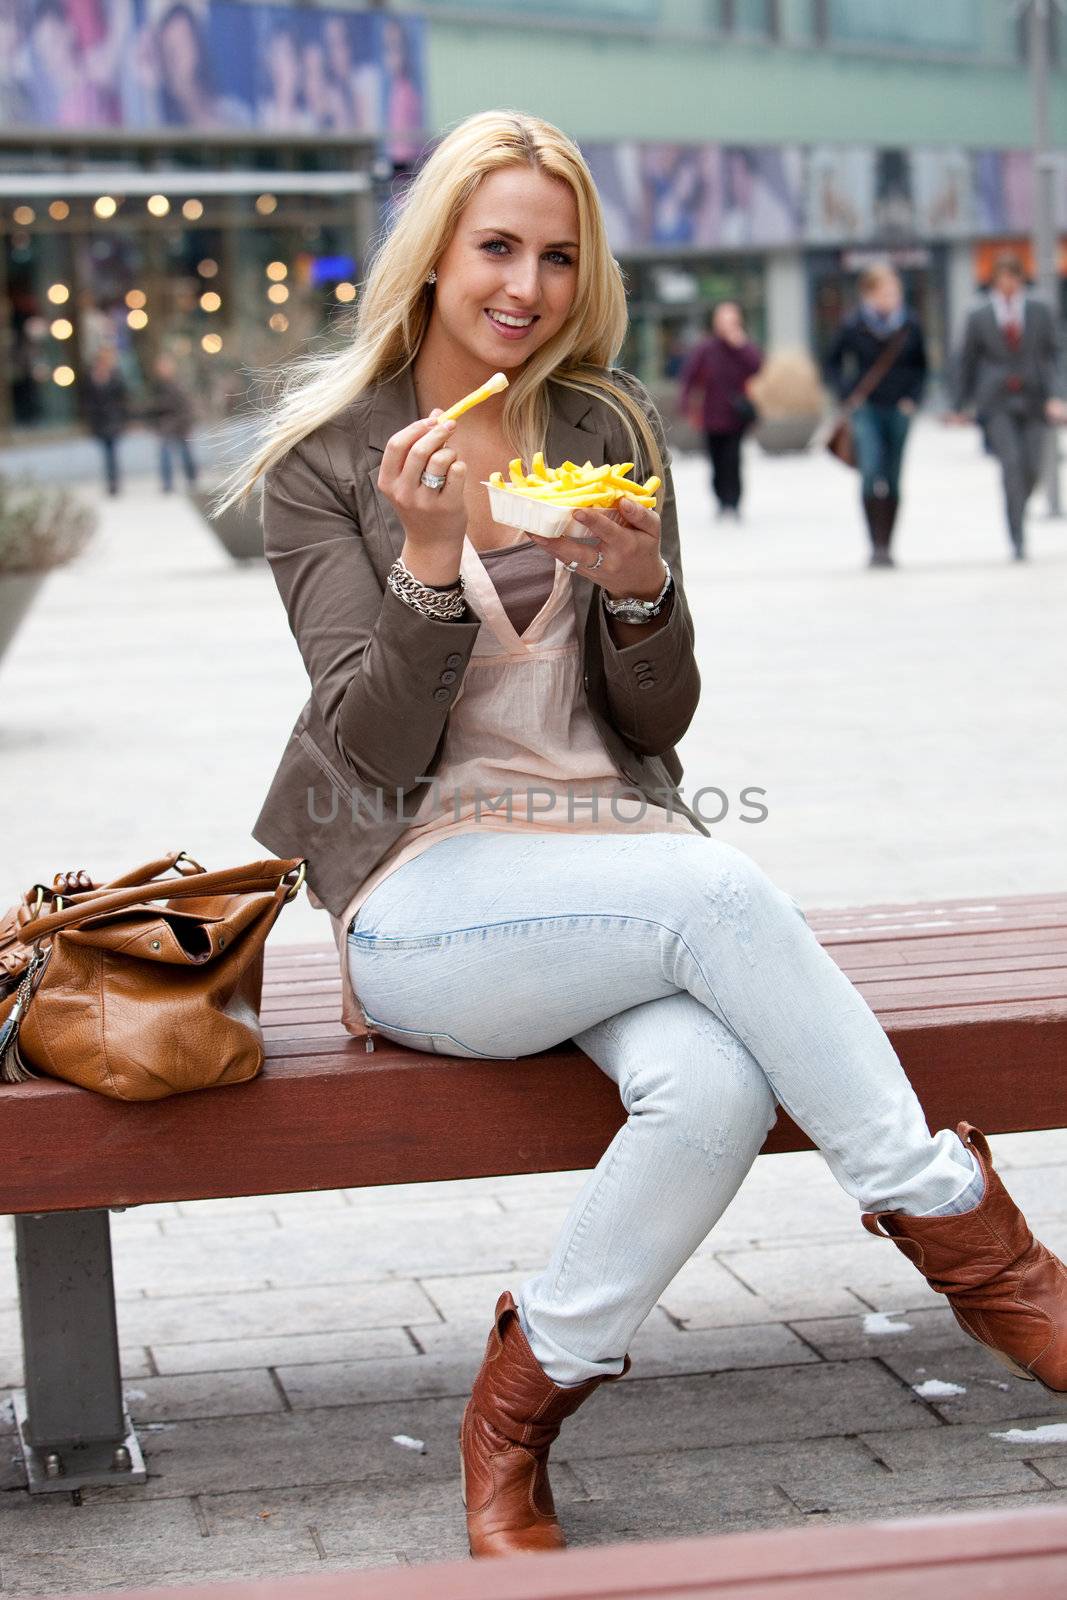 Pretty young blond girl sitting outdoors on a bench eating fries